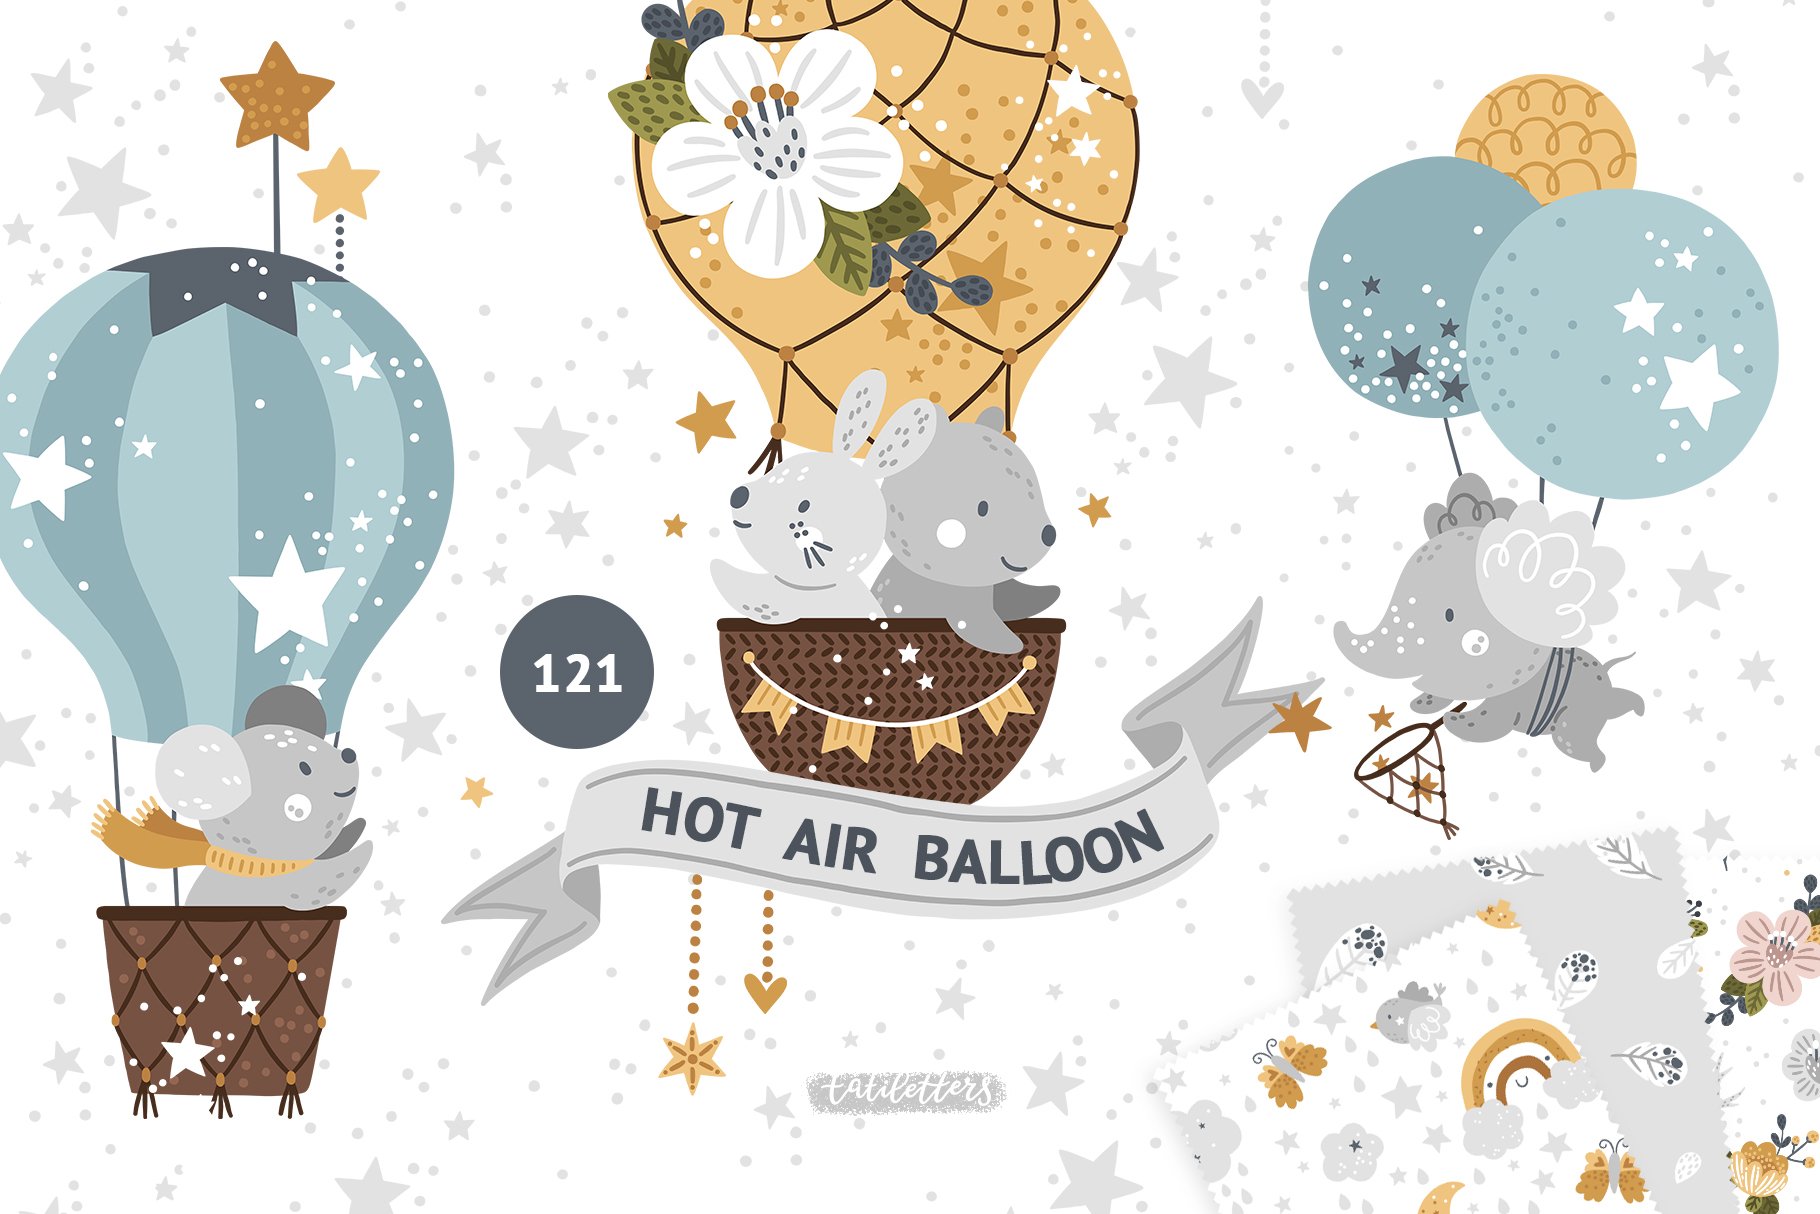 Hot air balloon illustration with a brave mouse.